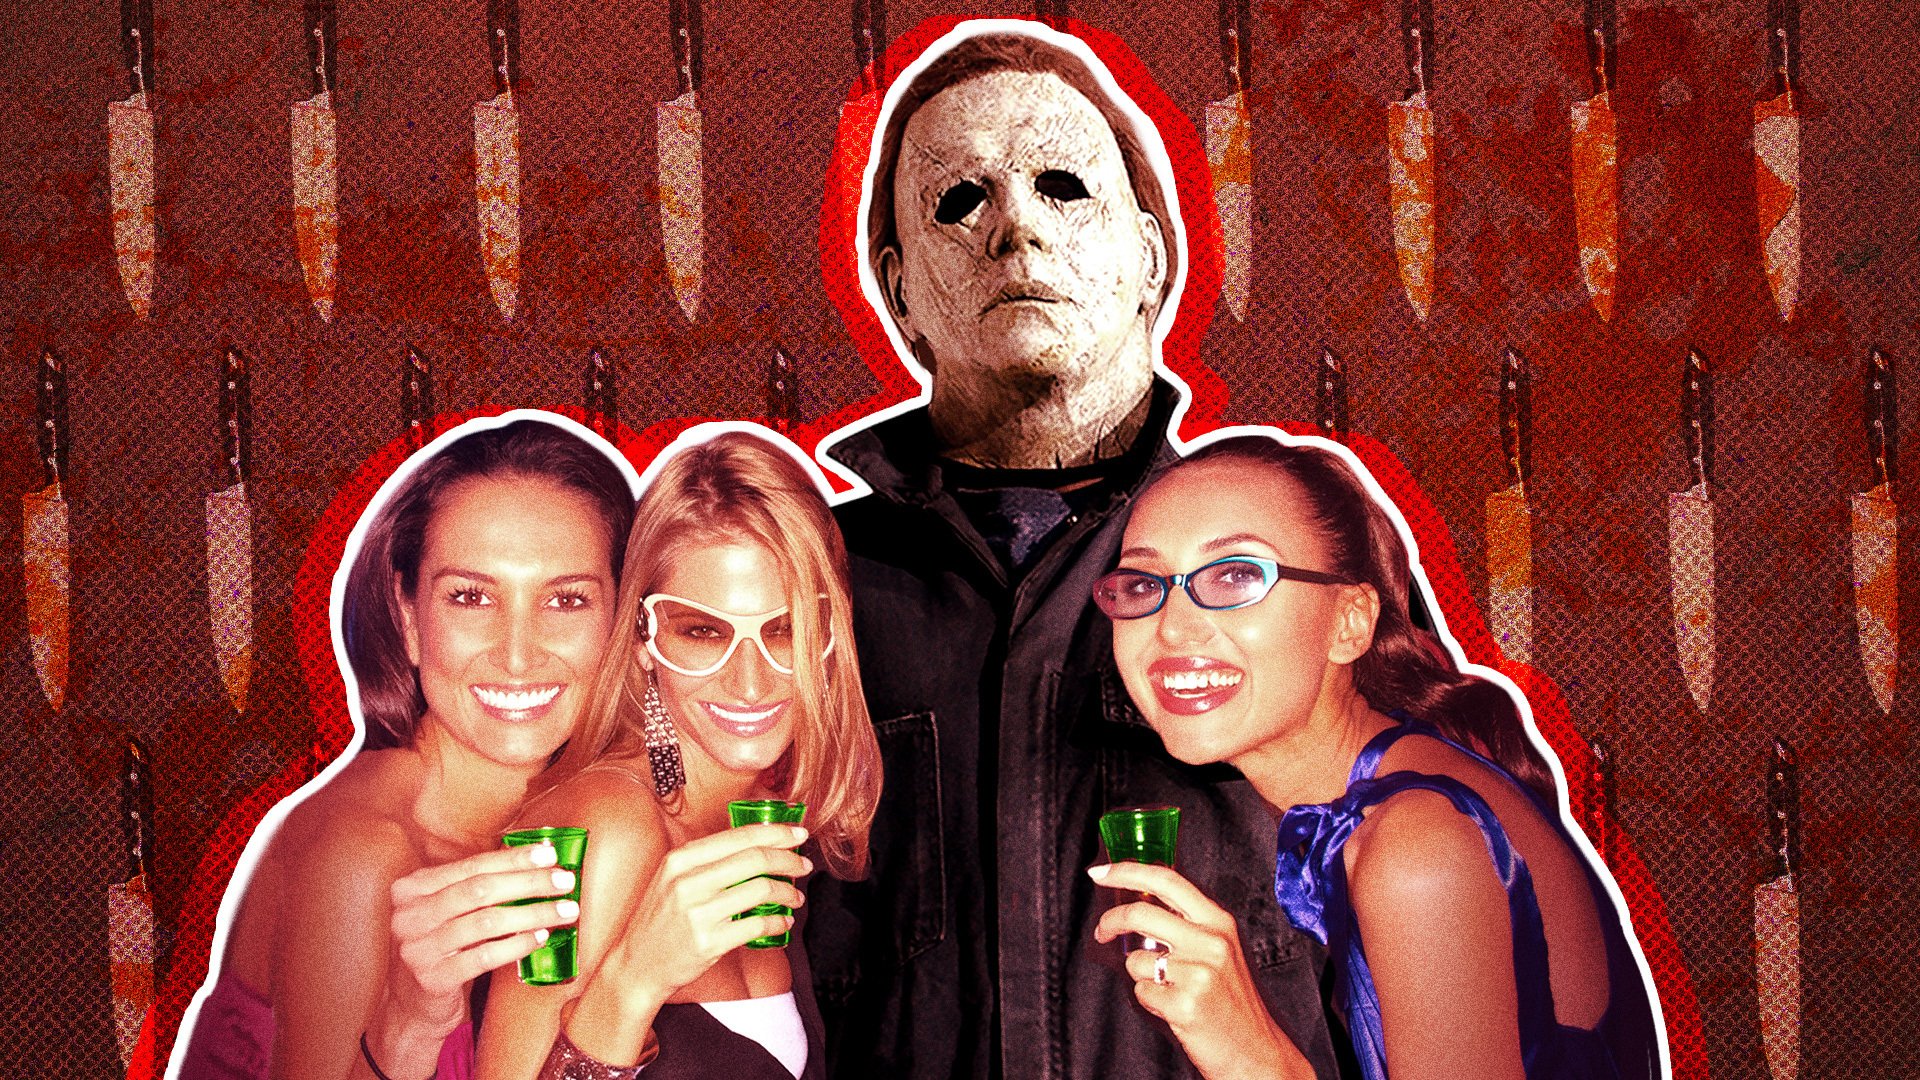 composite of Michael Myers taking jello shots with a group of women